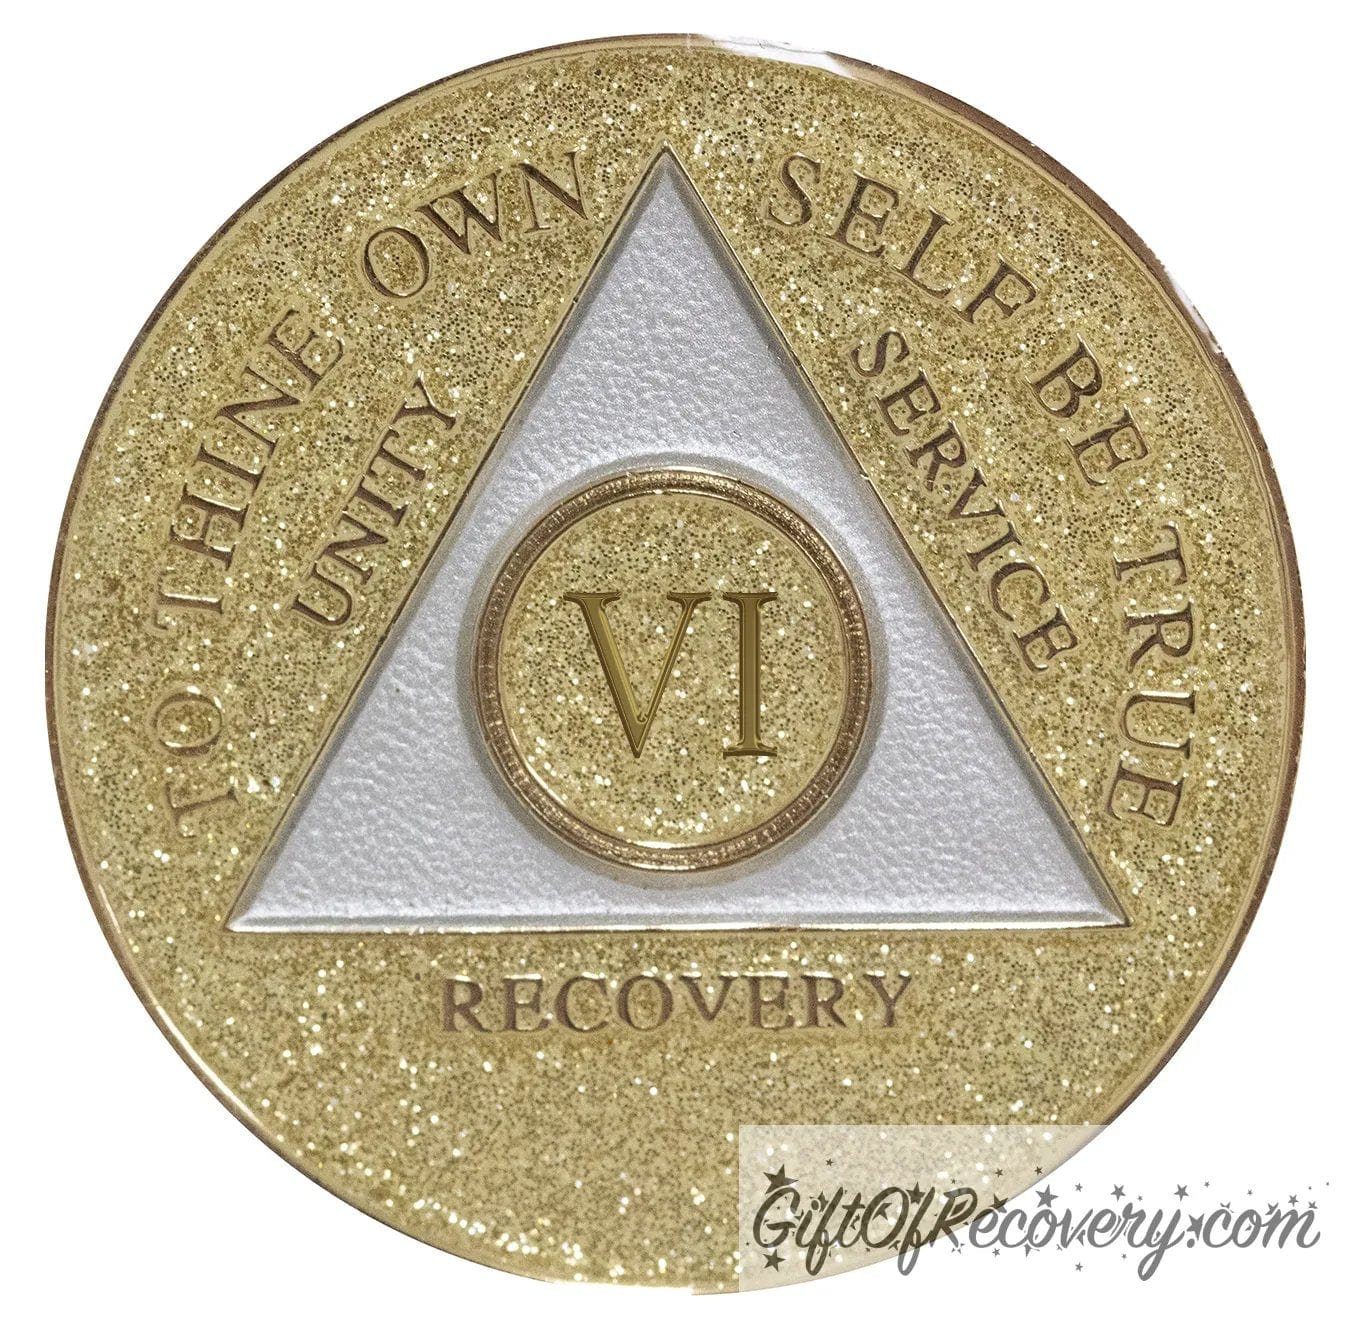 6 year AA medallion Gold glitter, with the triangle pearl white and to thine own self be true, unity, service, recovery, and the roman numeral embossed with 14k gold-plated brass, the recovery medallion is sealed with resin for a shiny finish that will last and is scratch proof.